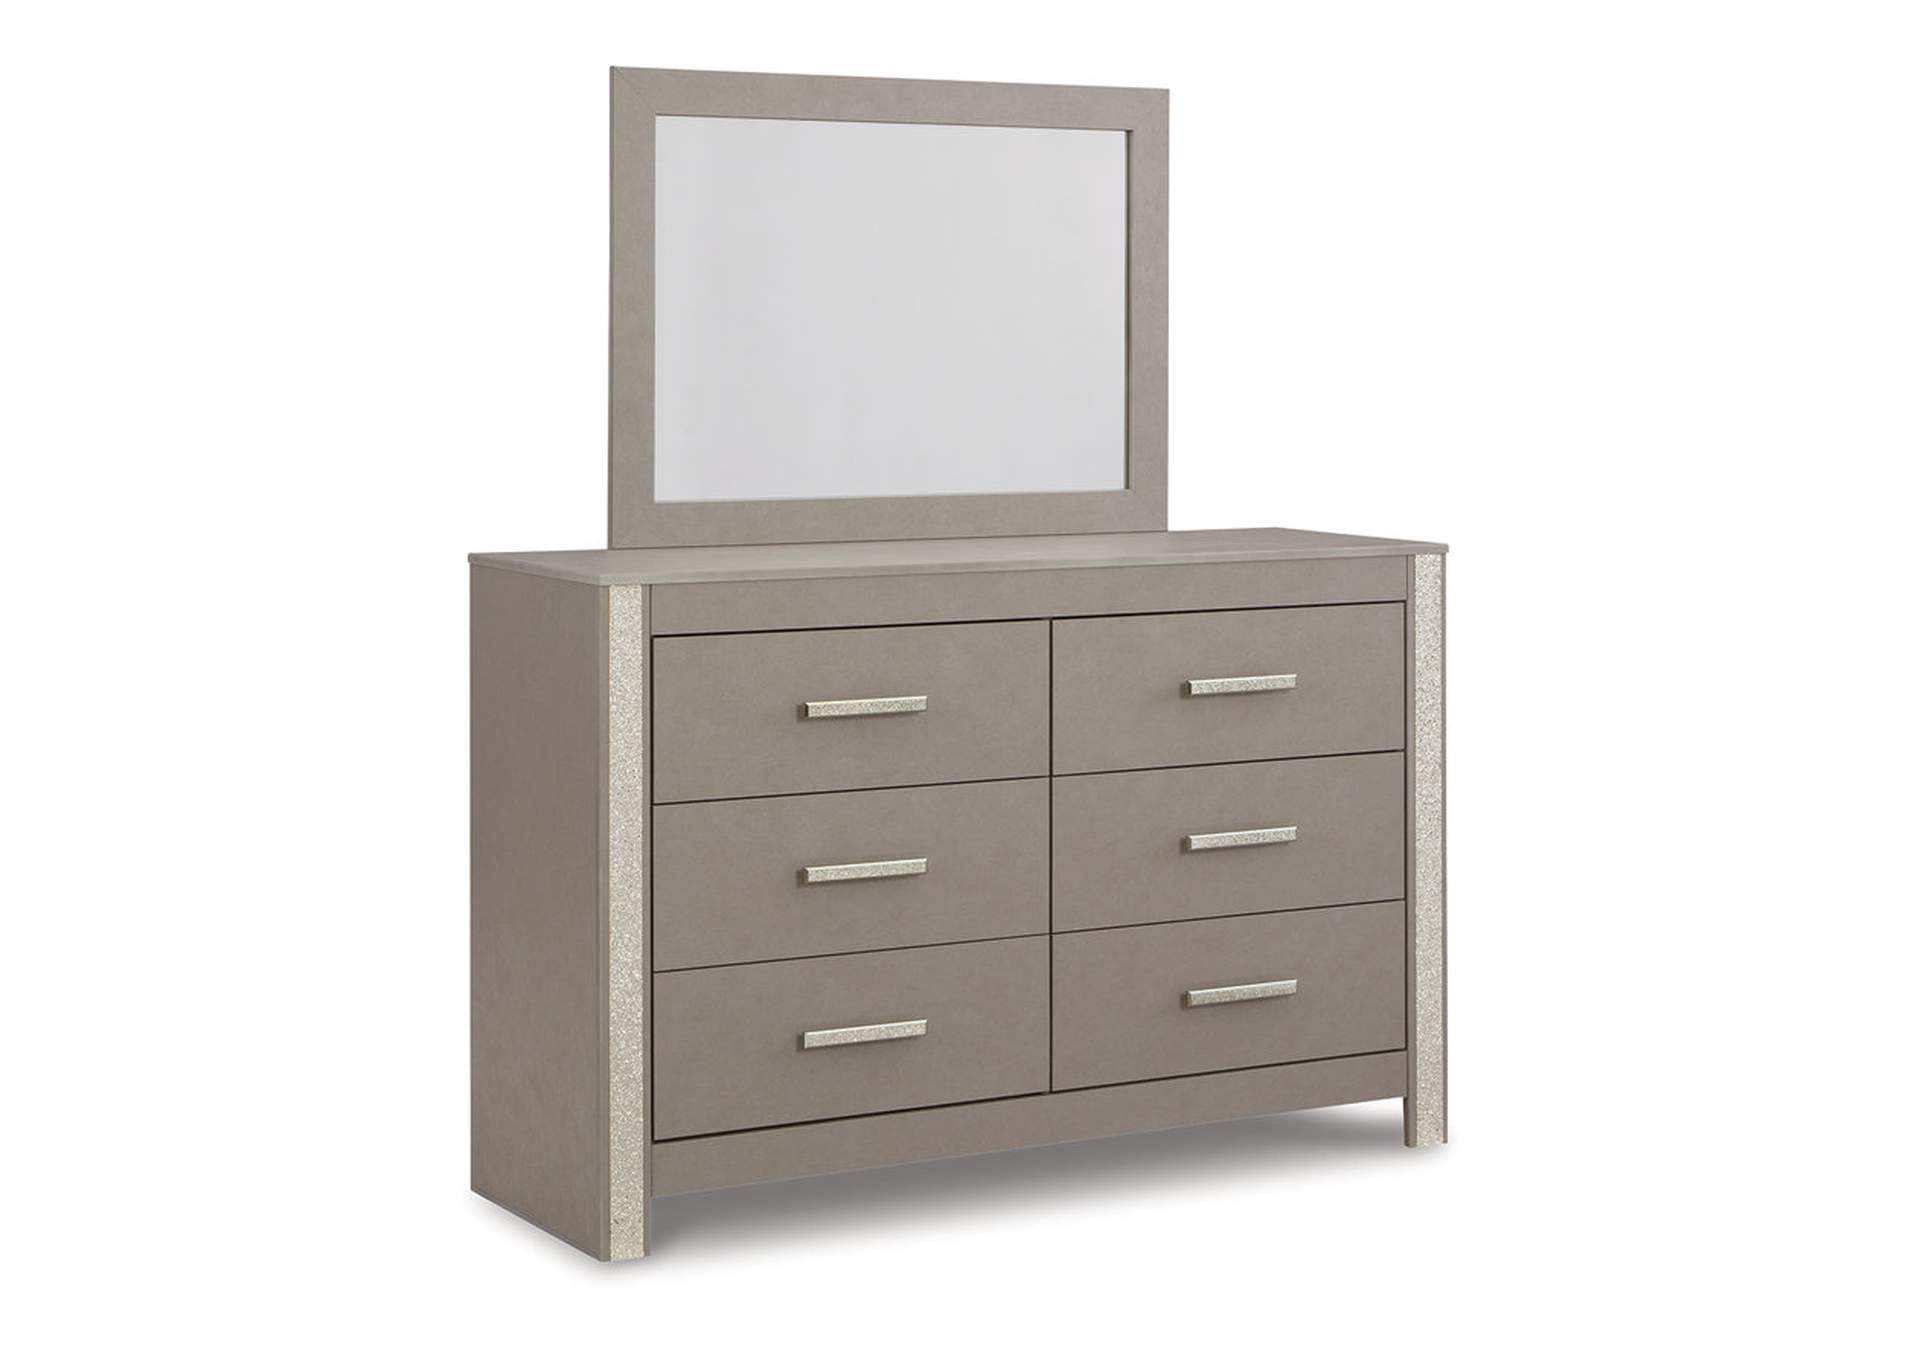 Surancha Queen Poster Bed, Dresser, Mirror and 2 Nightstands,Signature Design By Ashley